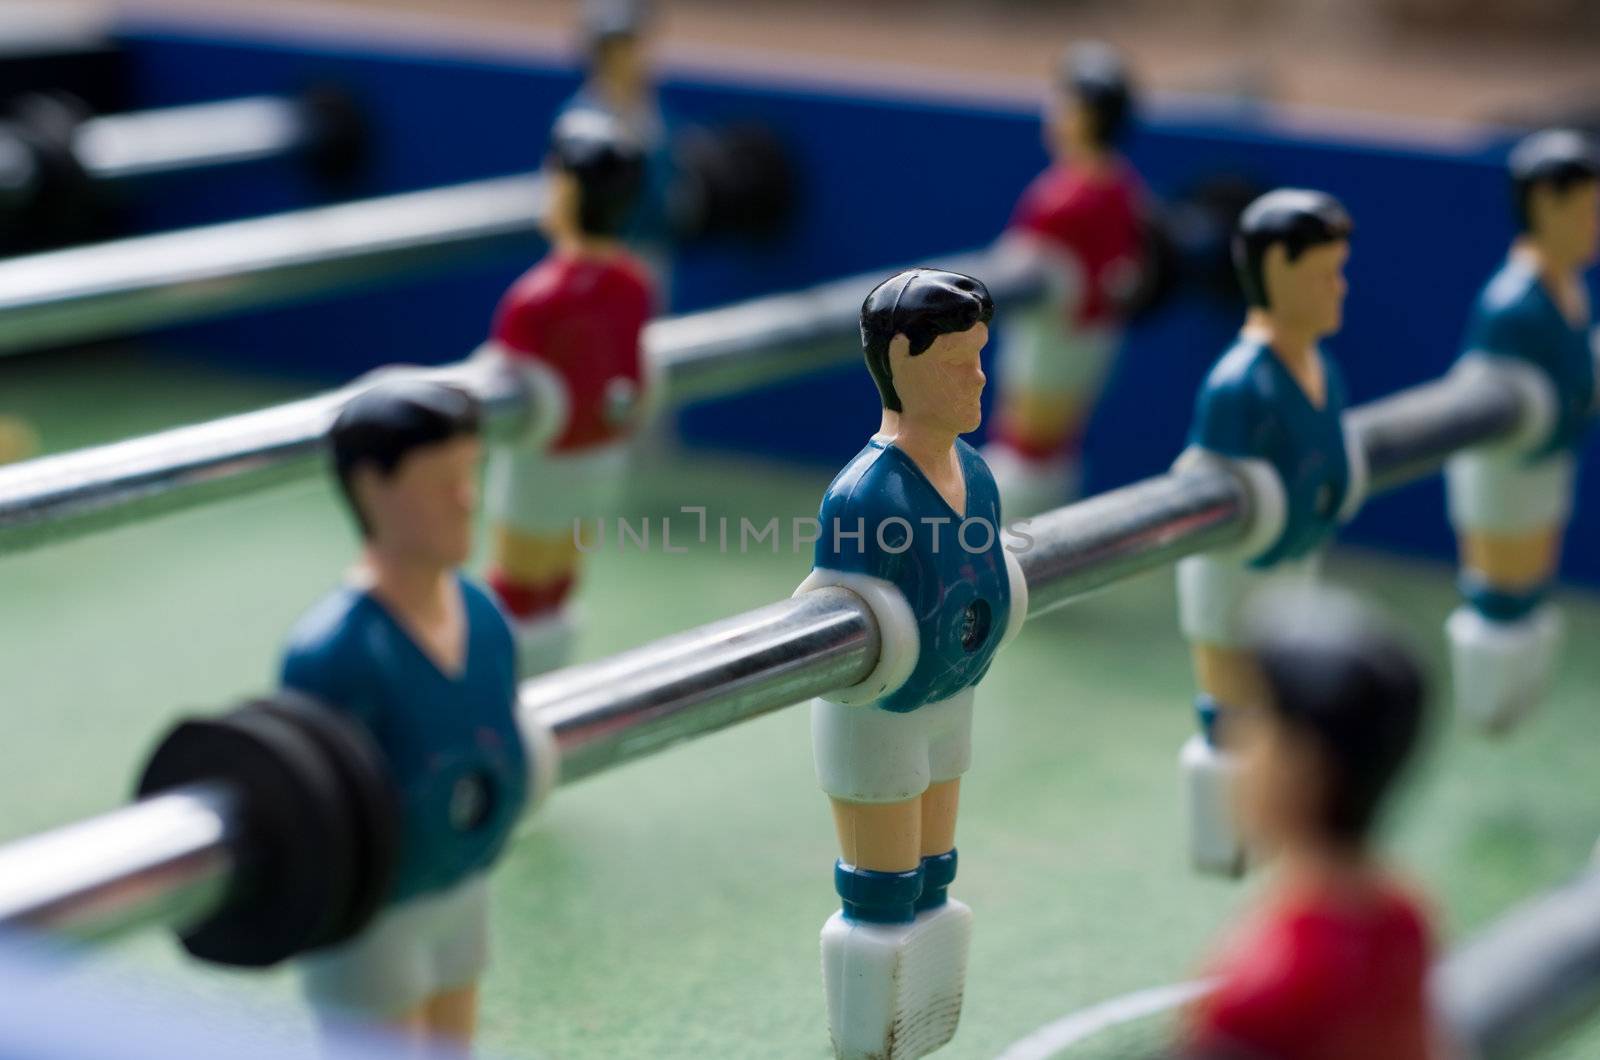 Blue table soccer players by alistaircotton